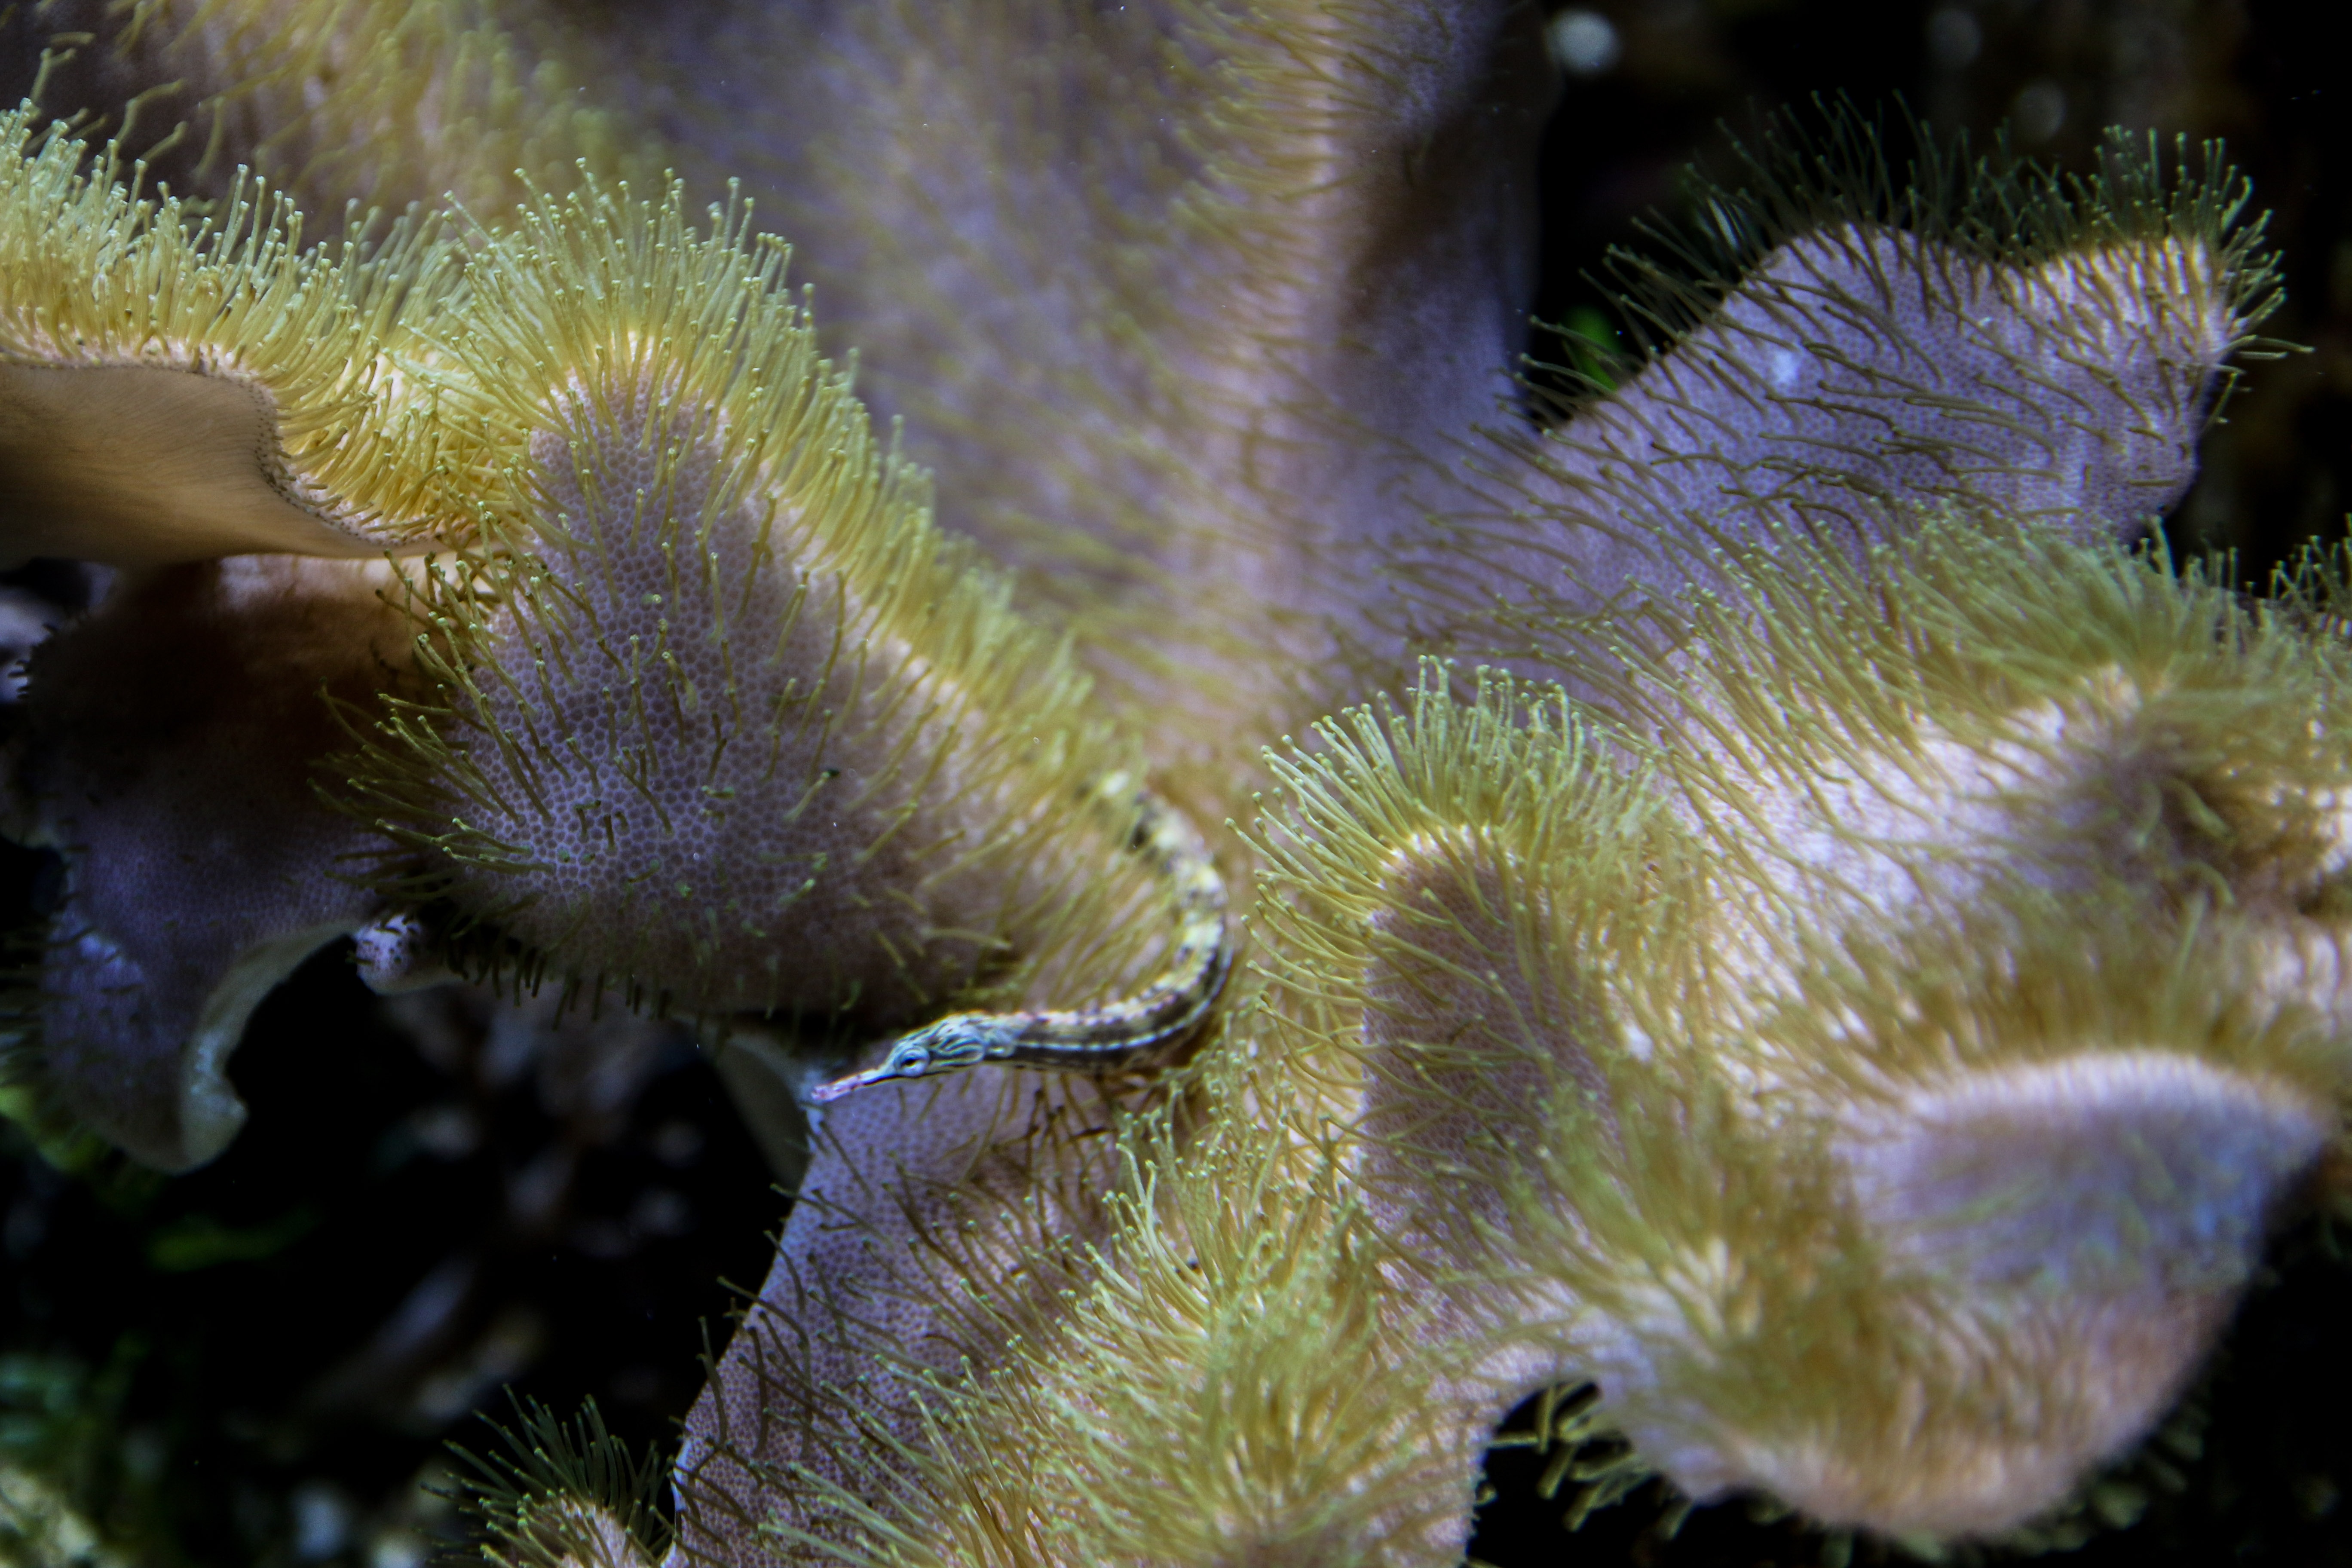 Coral reef photo